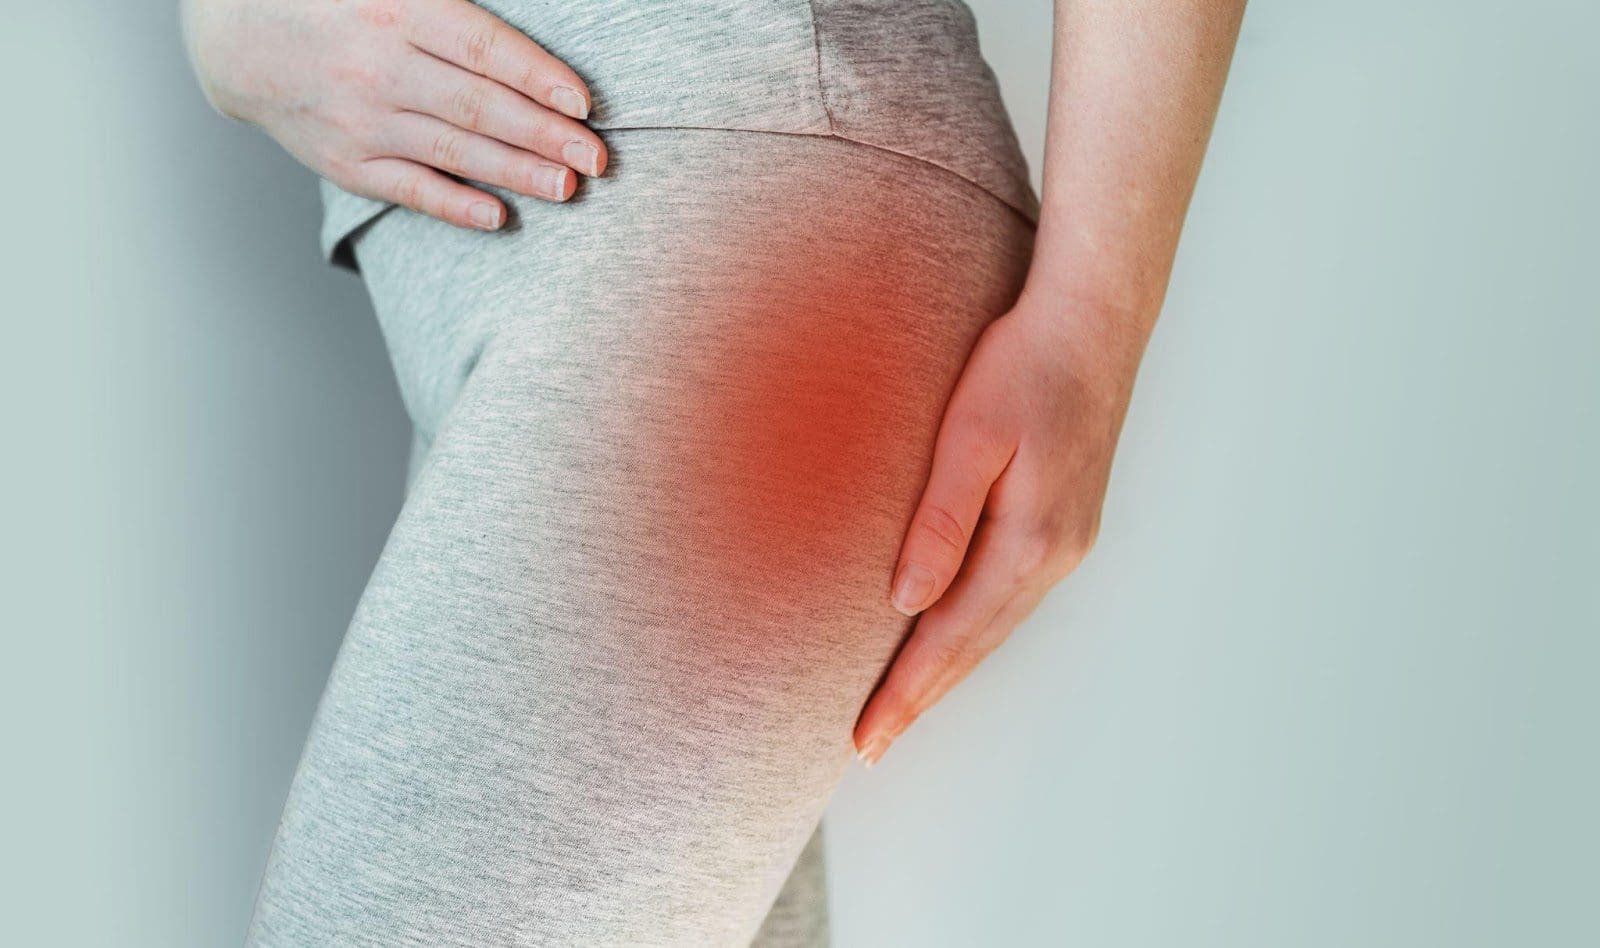 Close-up of a woman's right hip, glowing red to indicate pain from an annular tear.